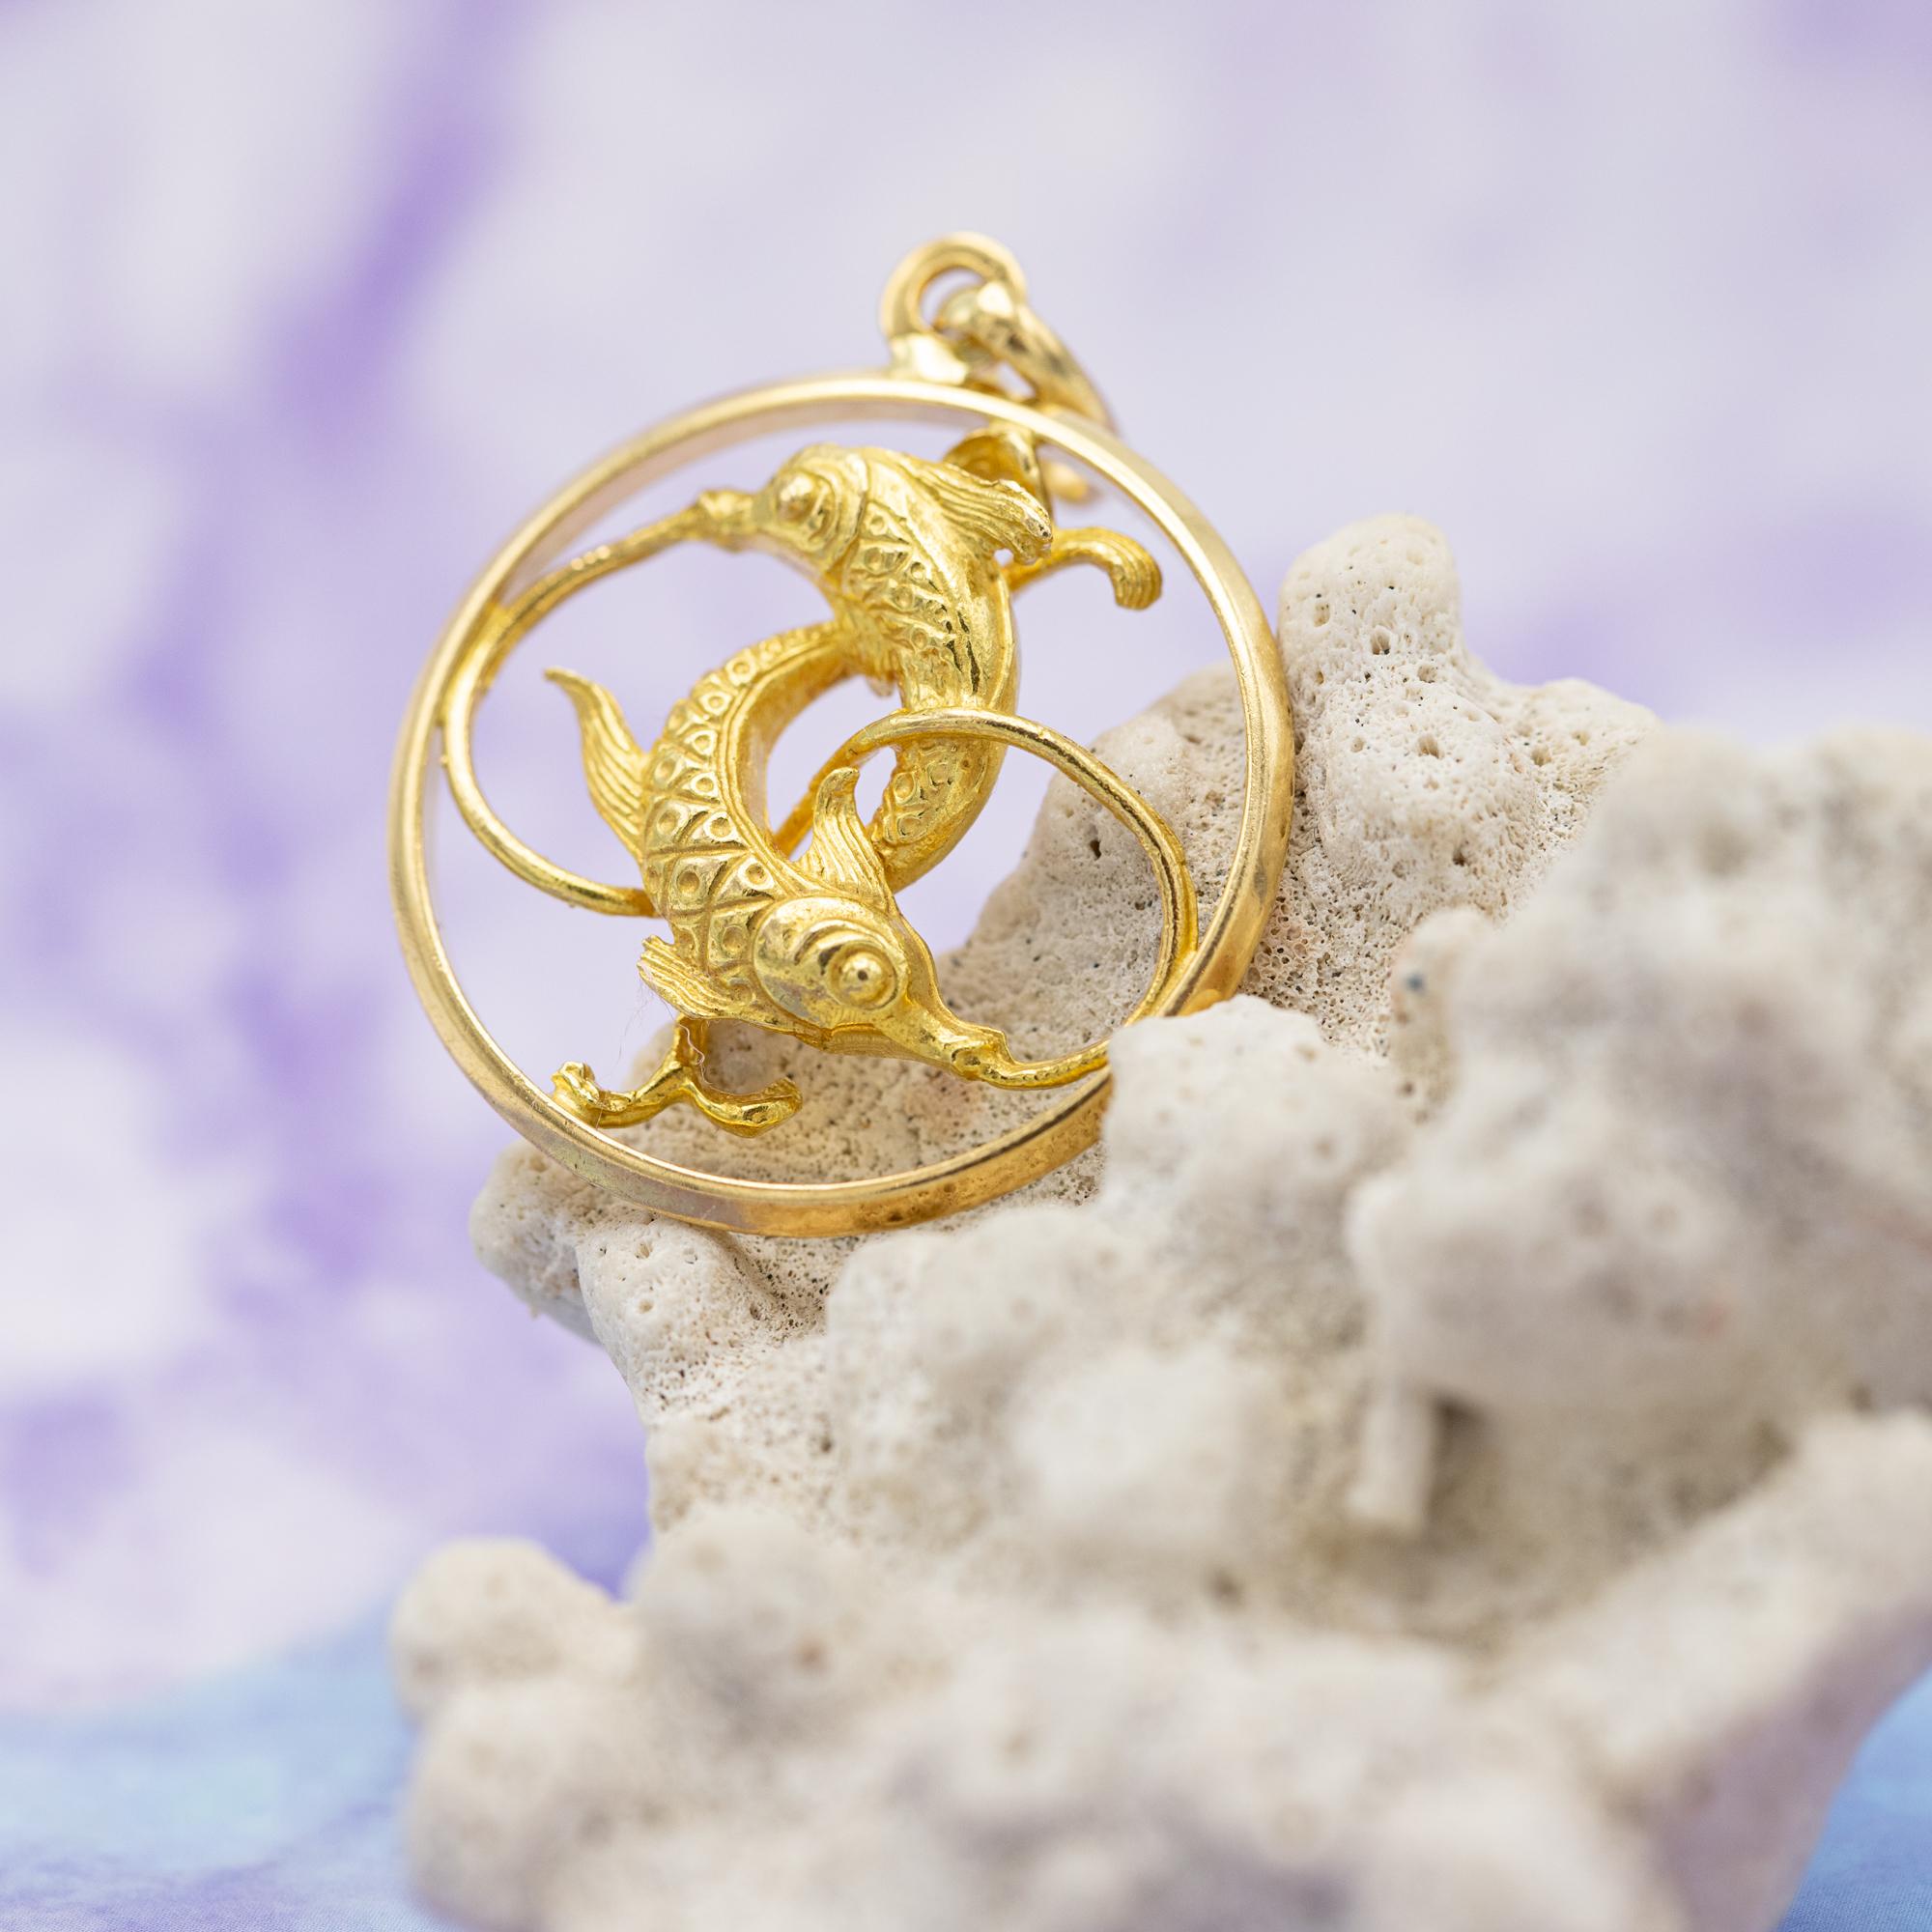 For sale is this vintage charm depicting a Pisces, the twelfth astrological sign in the zodiac. This Constellation Star Sign Pendant is associated with the birth dates between 22 February and 21 March. This pretty charm is marked with a 750 mark and